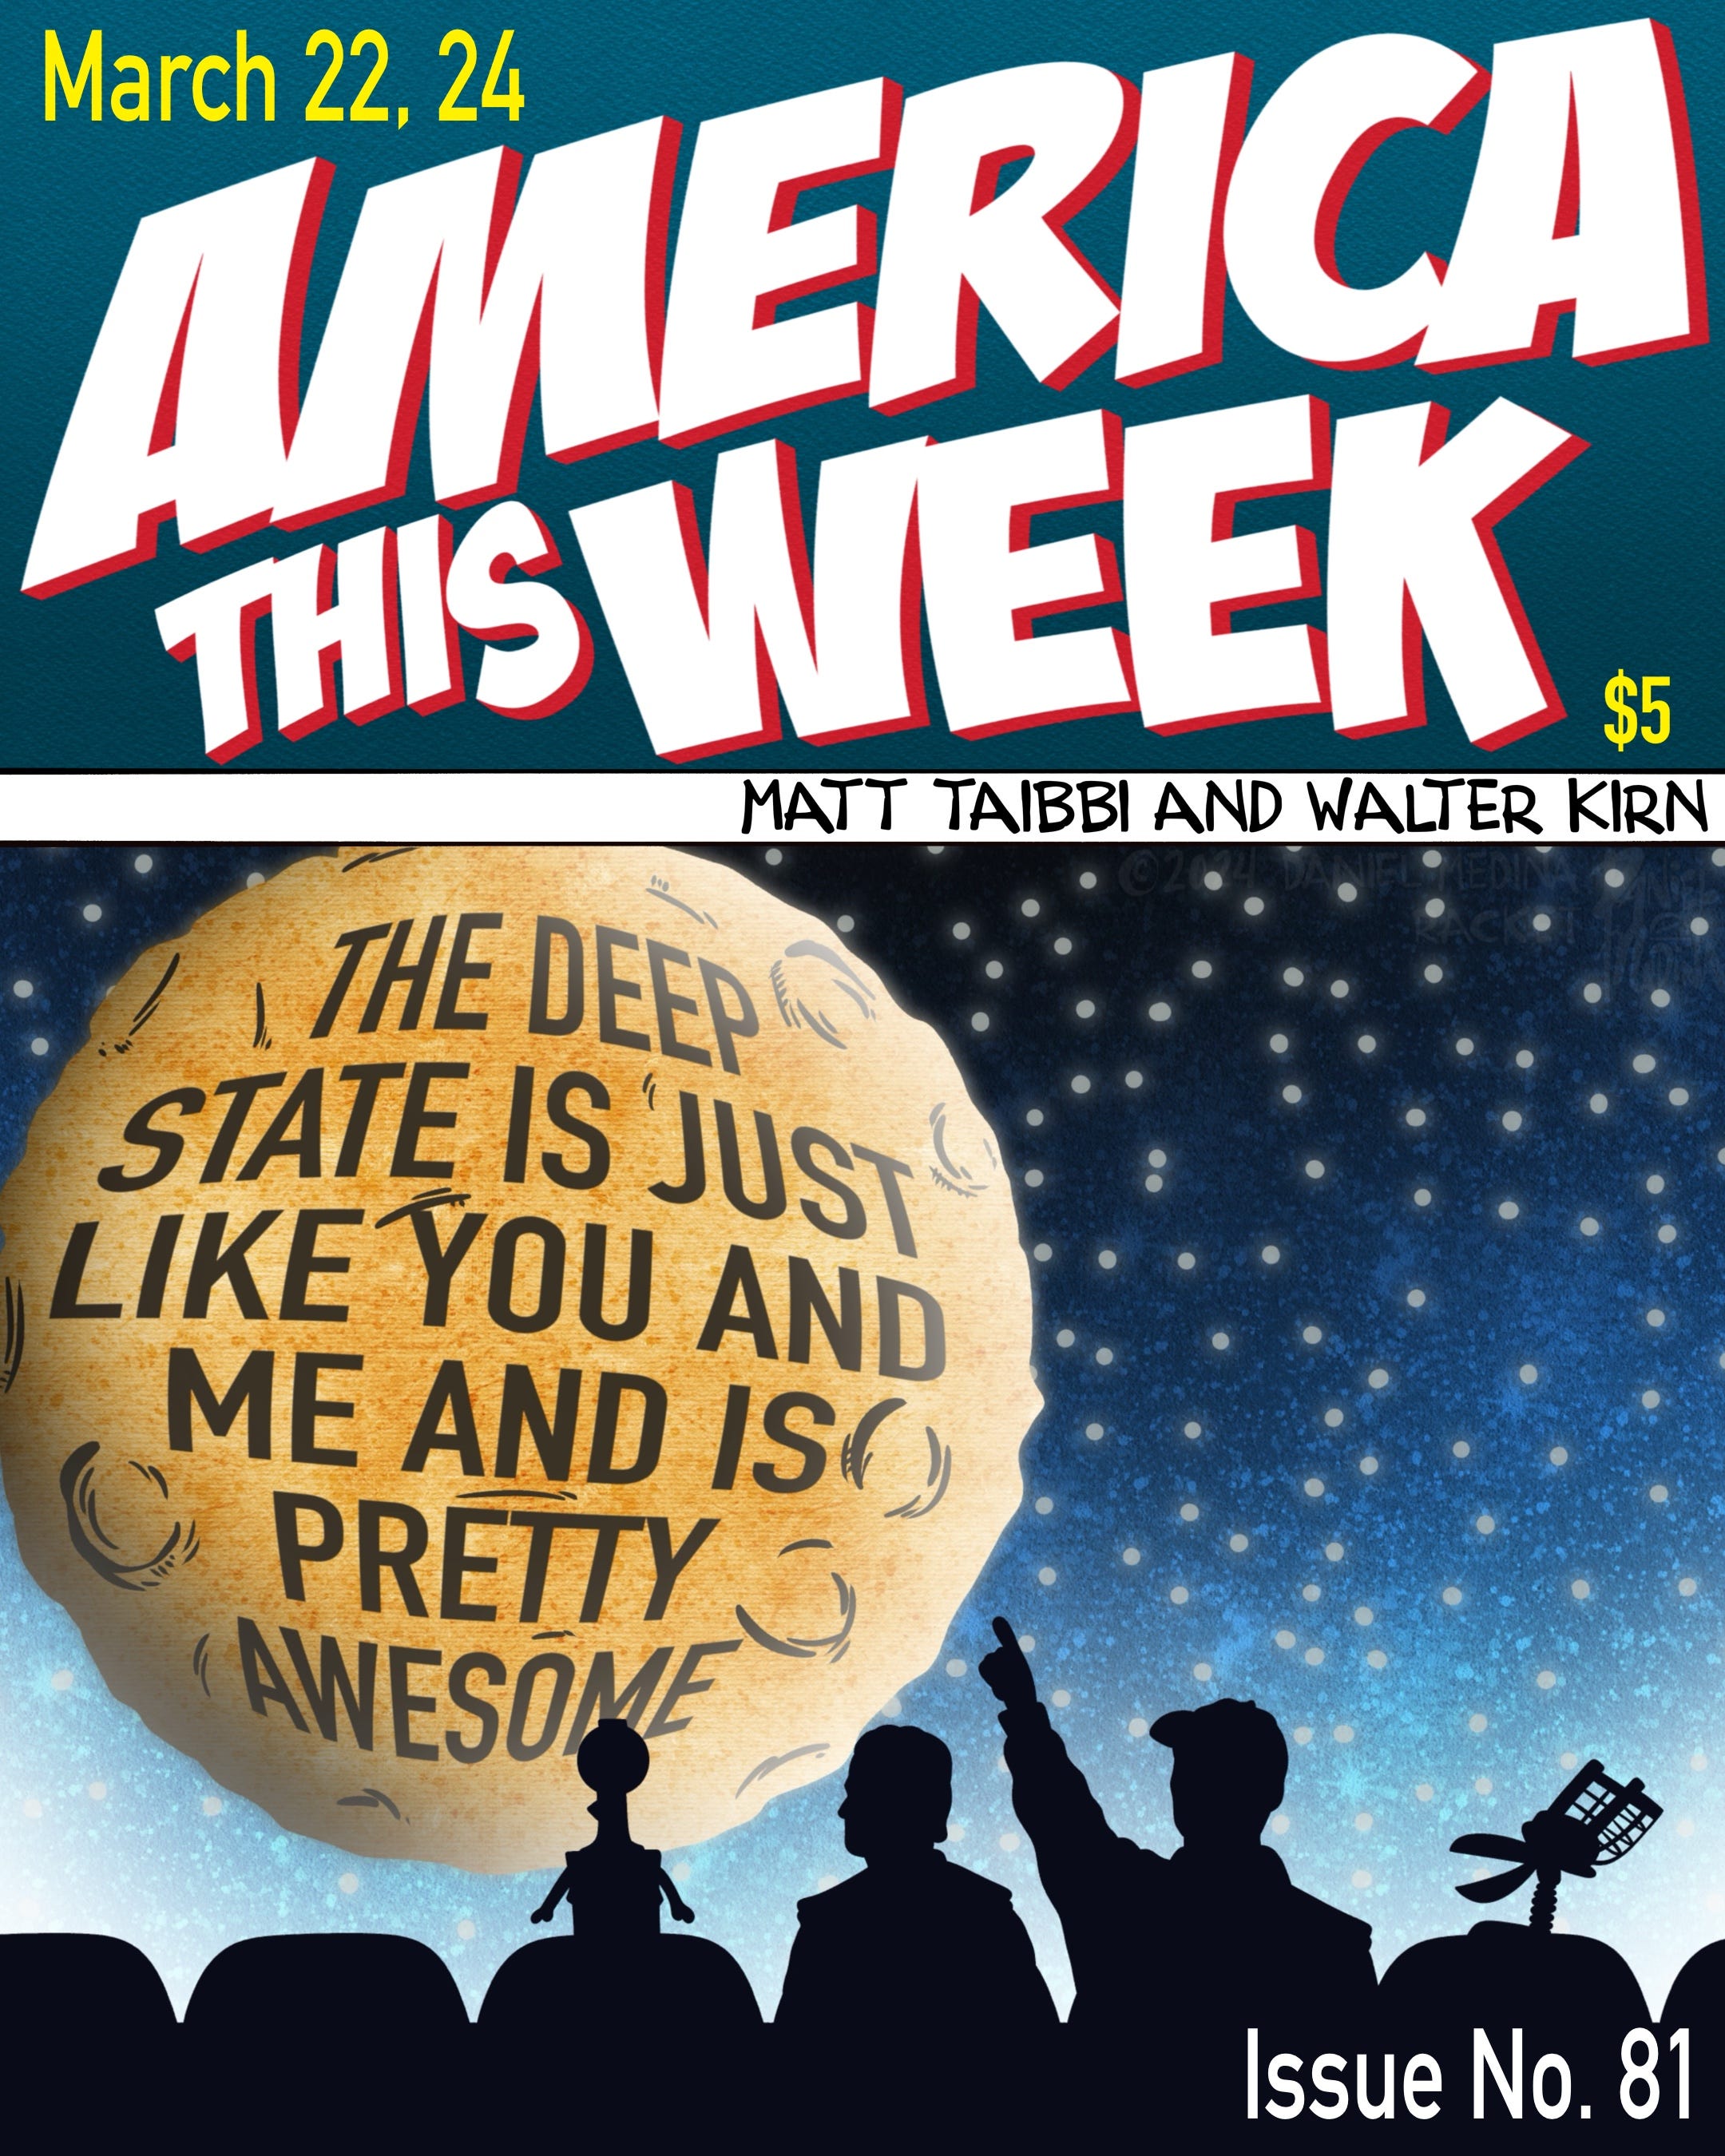 America This Week, March 22, 2024: ”Swimming in the Deep State is Kind of Awesome”